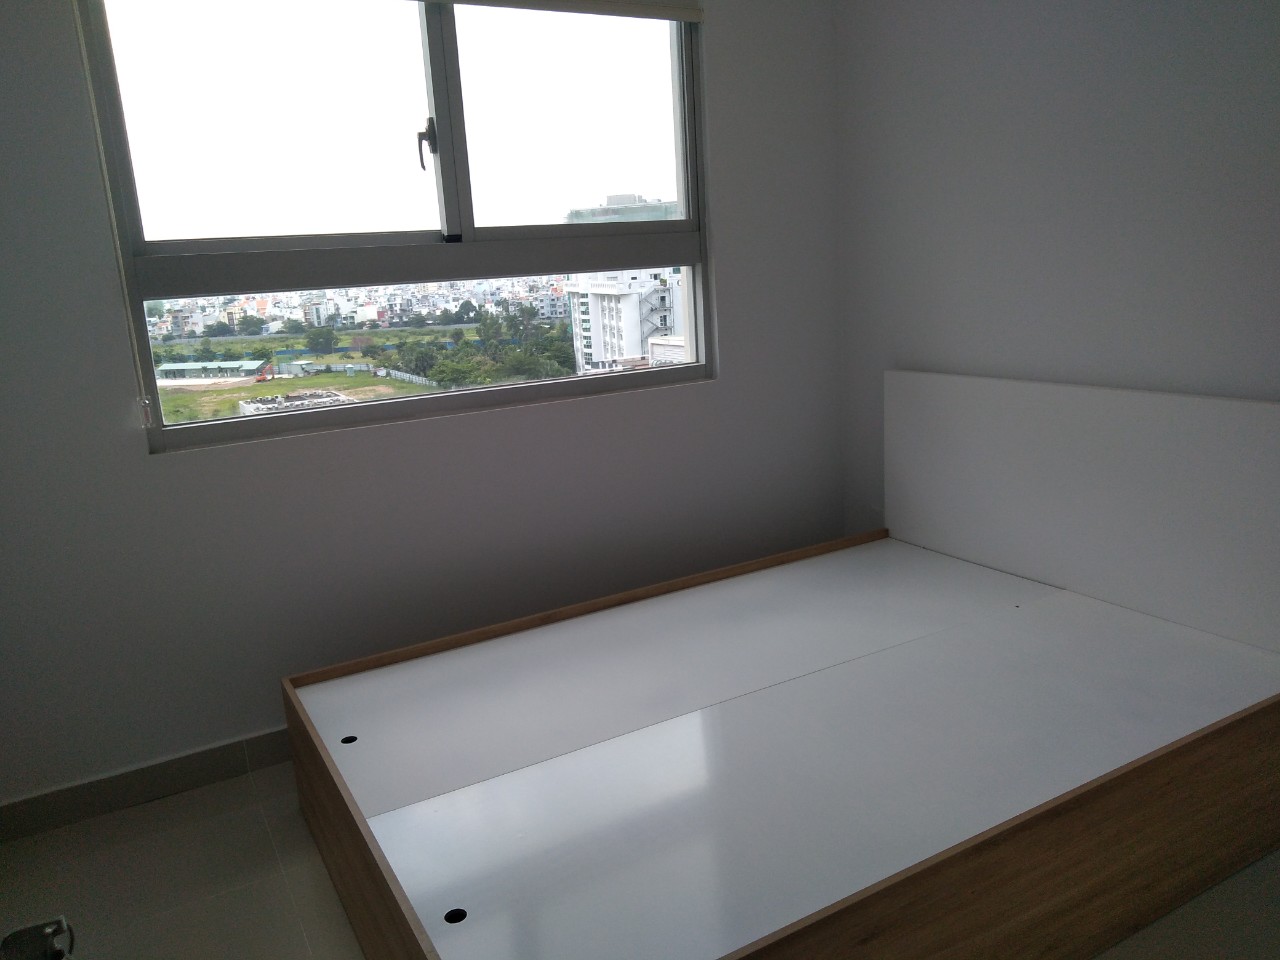  Apartment for rent in Scenic Valley 1, Phu My Hung, District 7, 18 million / month, 71m, 2BR, 2WC Call: Ms. Hà 0906 385 299.